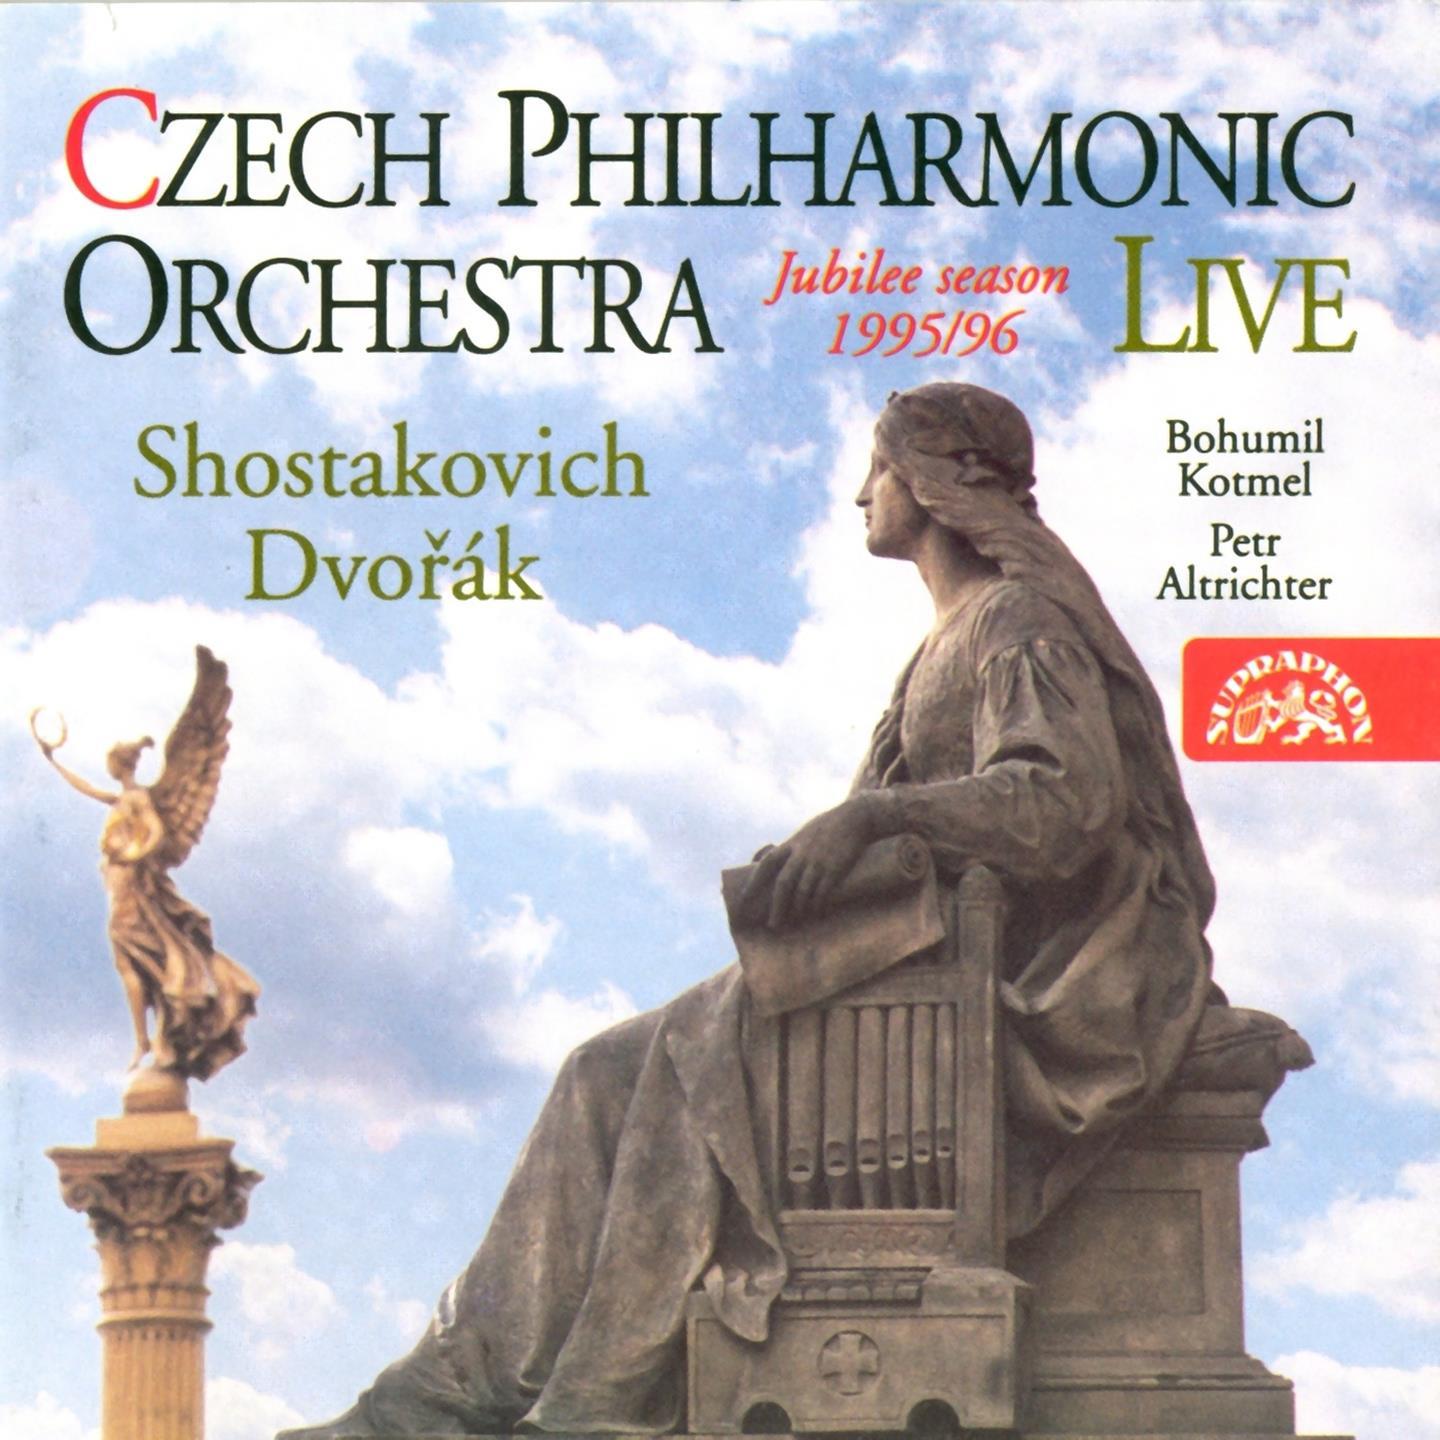 Suite for Orchestra in A Major, Op. 98a, B. 190: II. Allegro